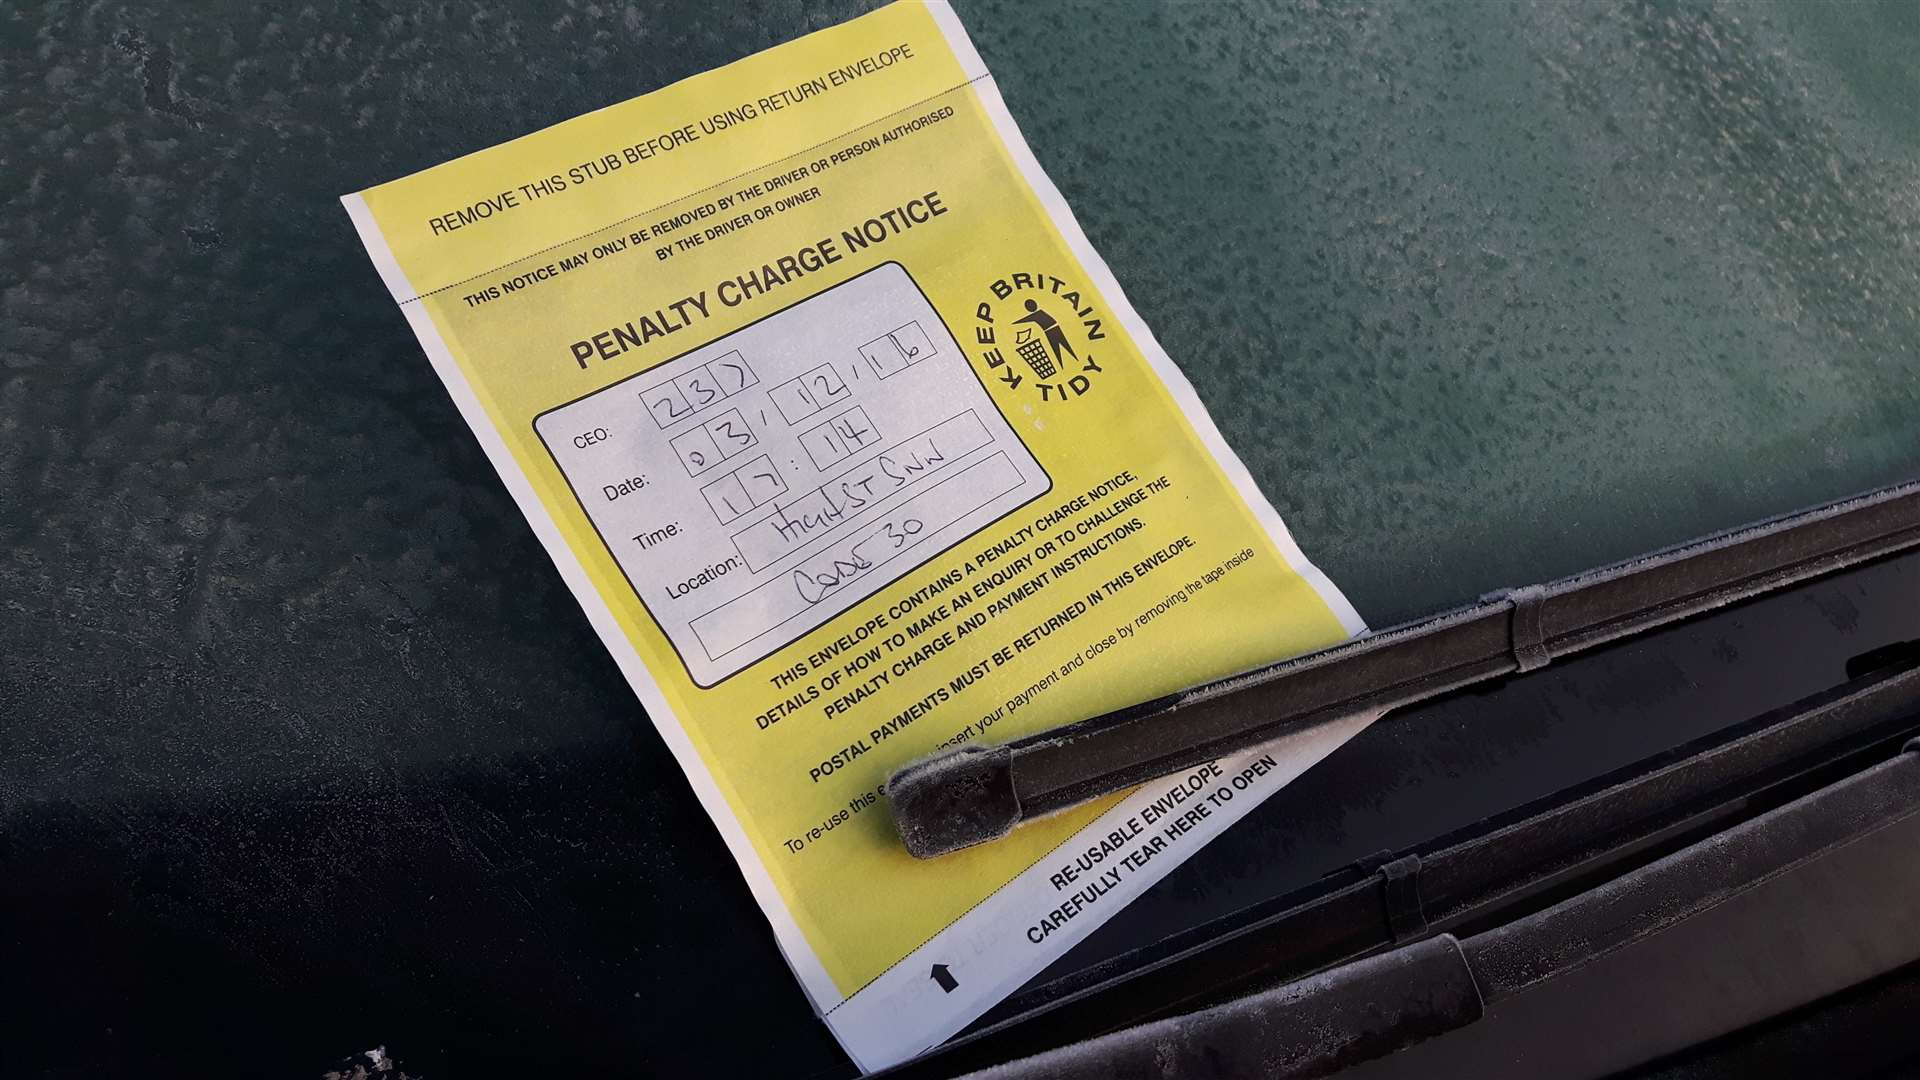 The dreaded yellow parking ticket